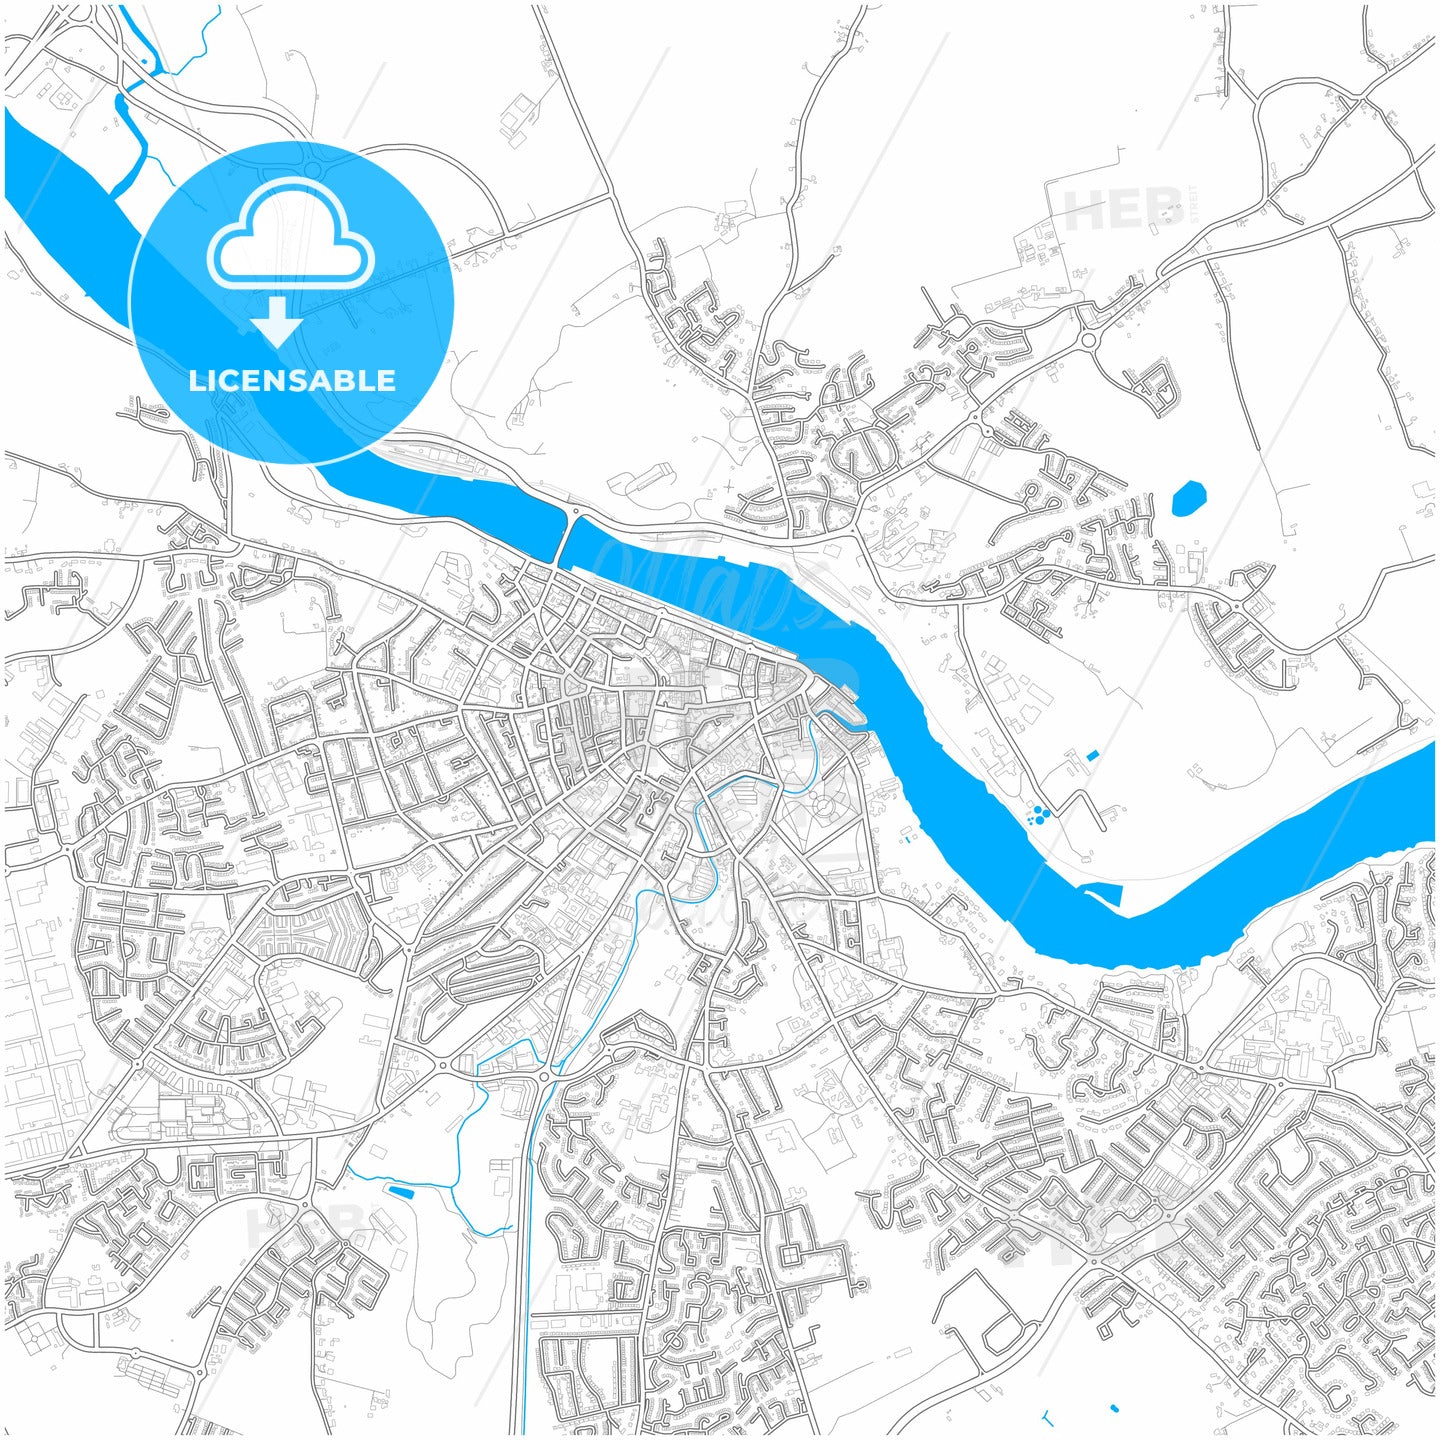 Waterford, County Waterford &amp; County Kilkenny, Ireland, city map with high quality roads.